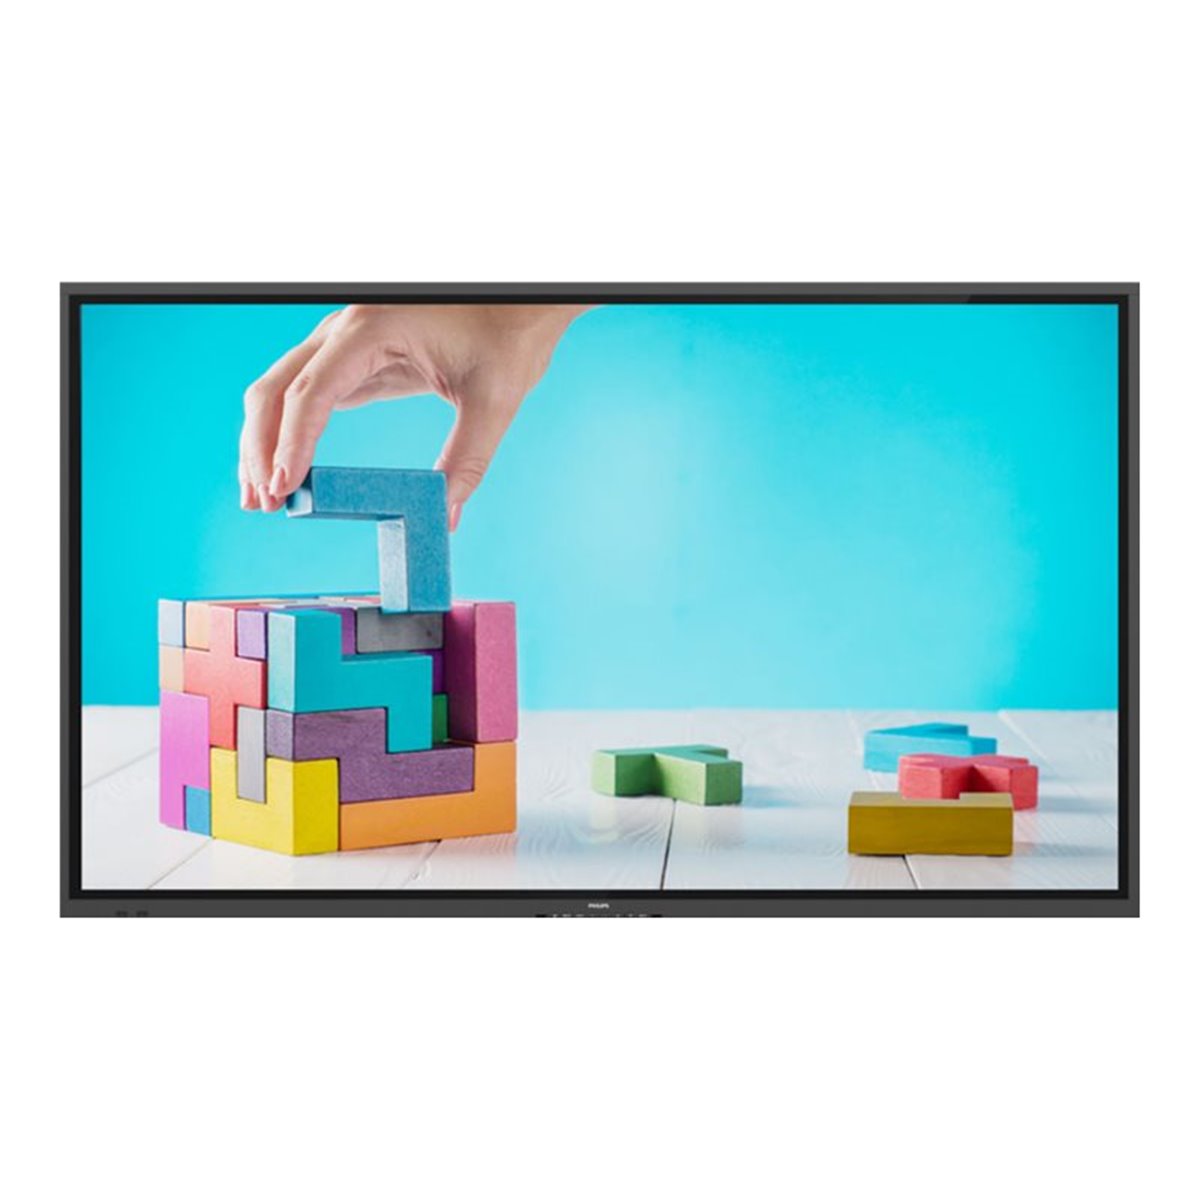 E-Line - 65 inch - Multi-Touch - 4K Ultra HD Digital Signage Display - 3840x2160 - Android - RJ45 - Speakers